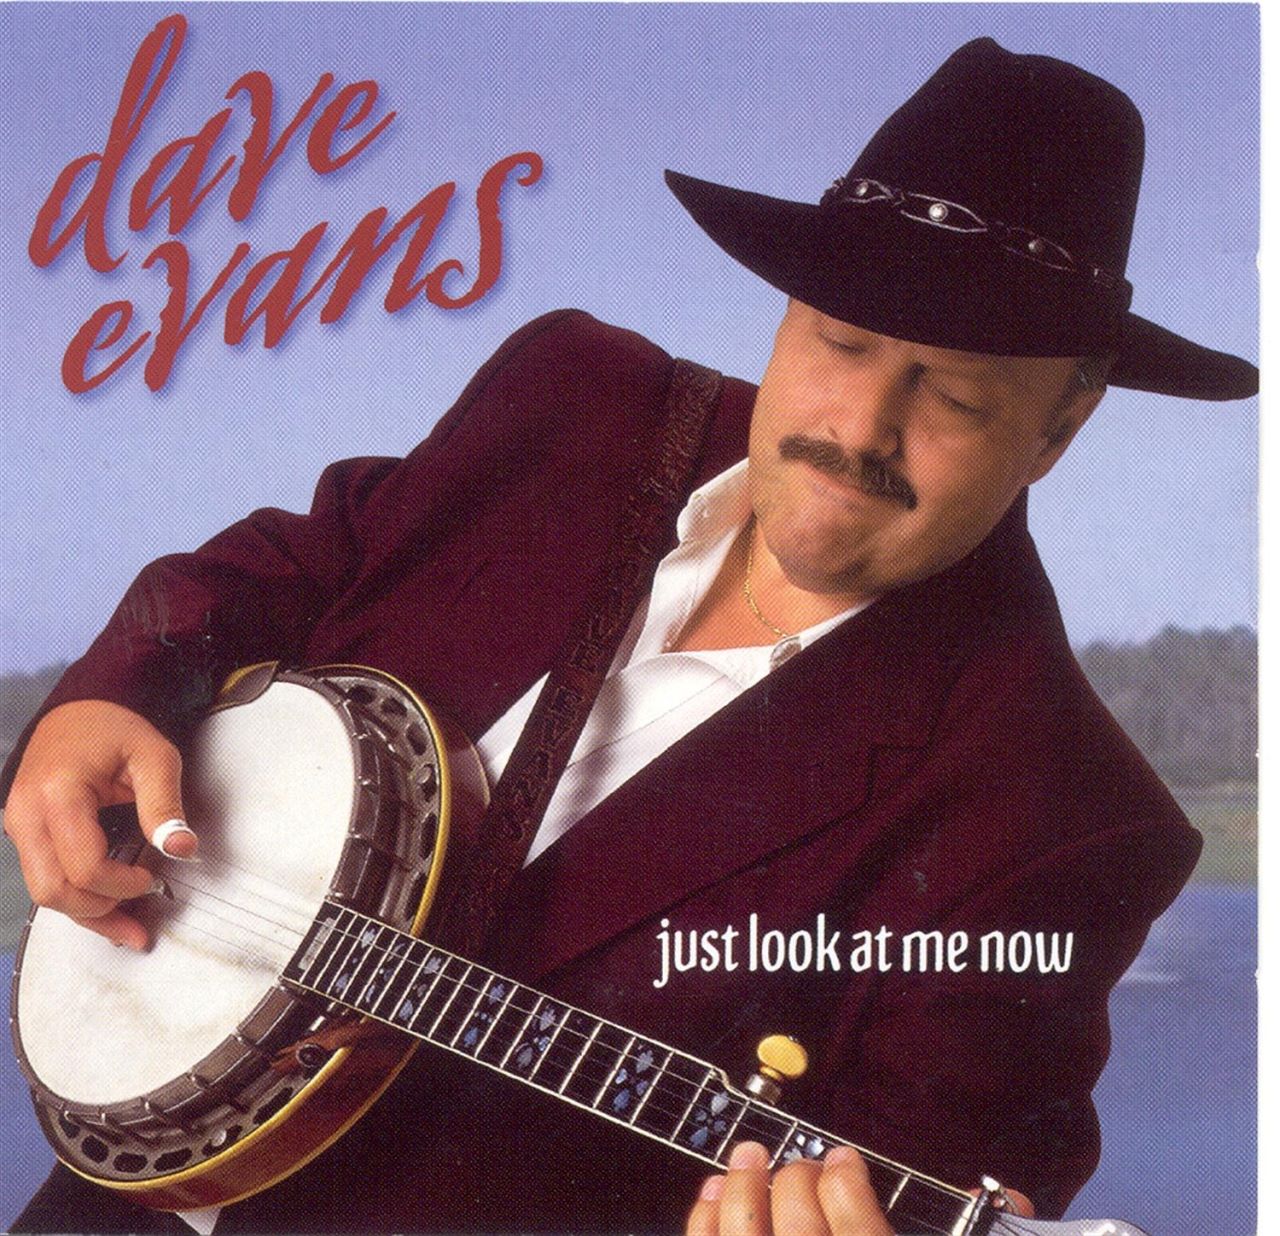 Dave Evans - Just Look At Me Now cover album